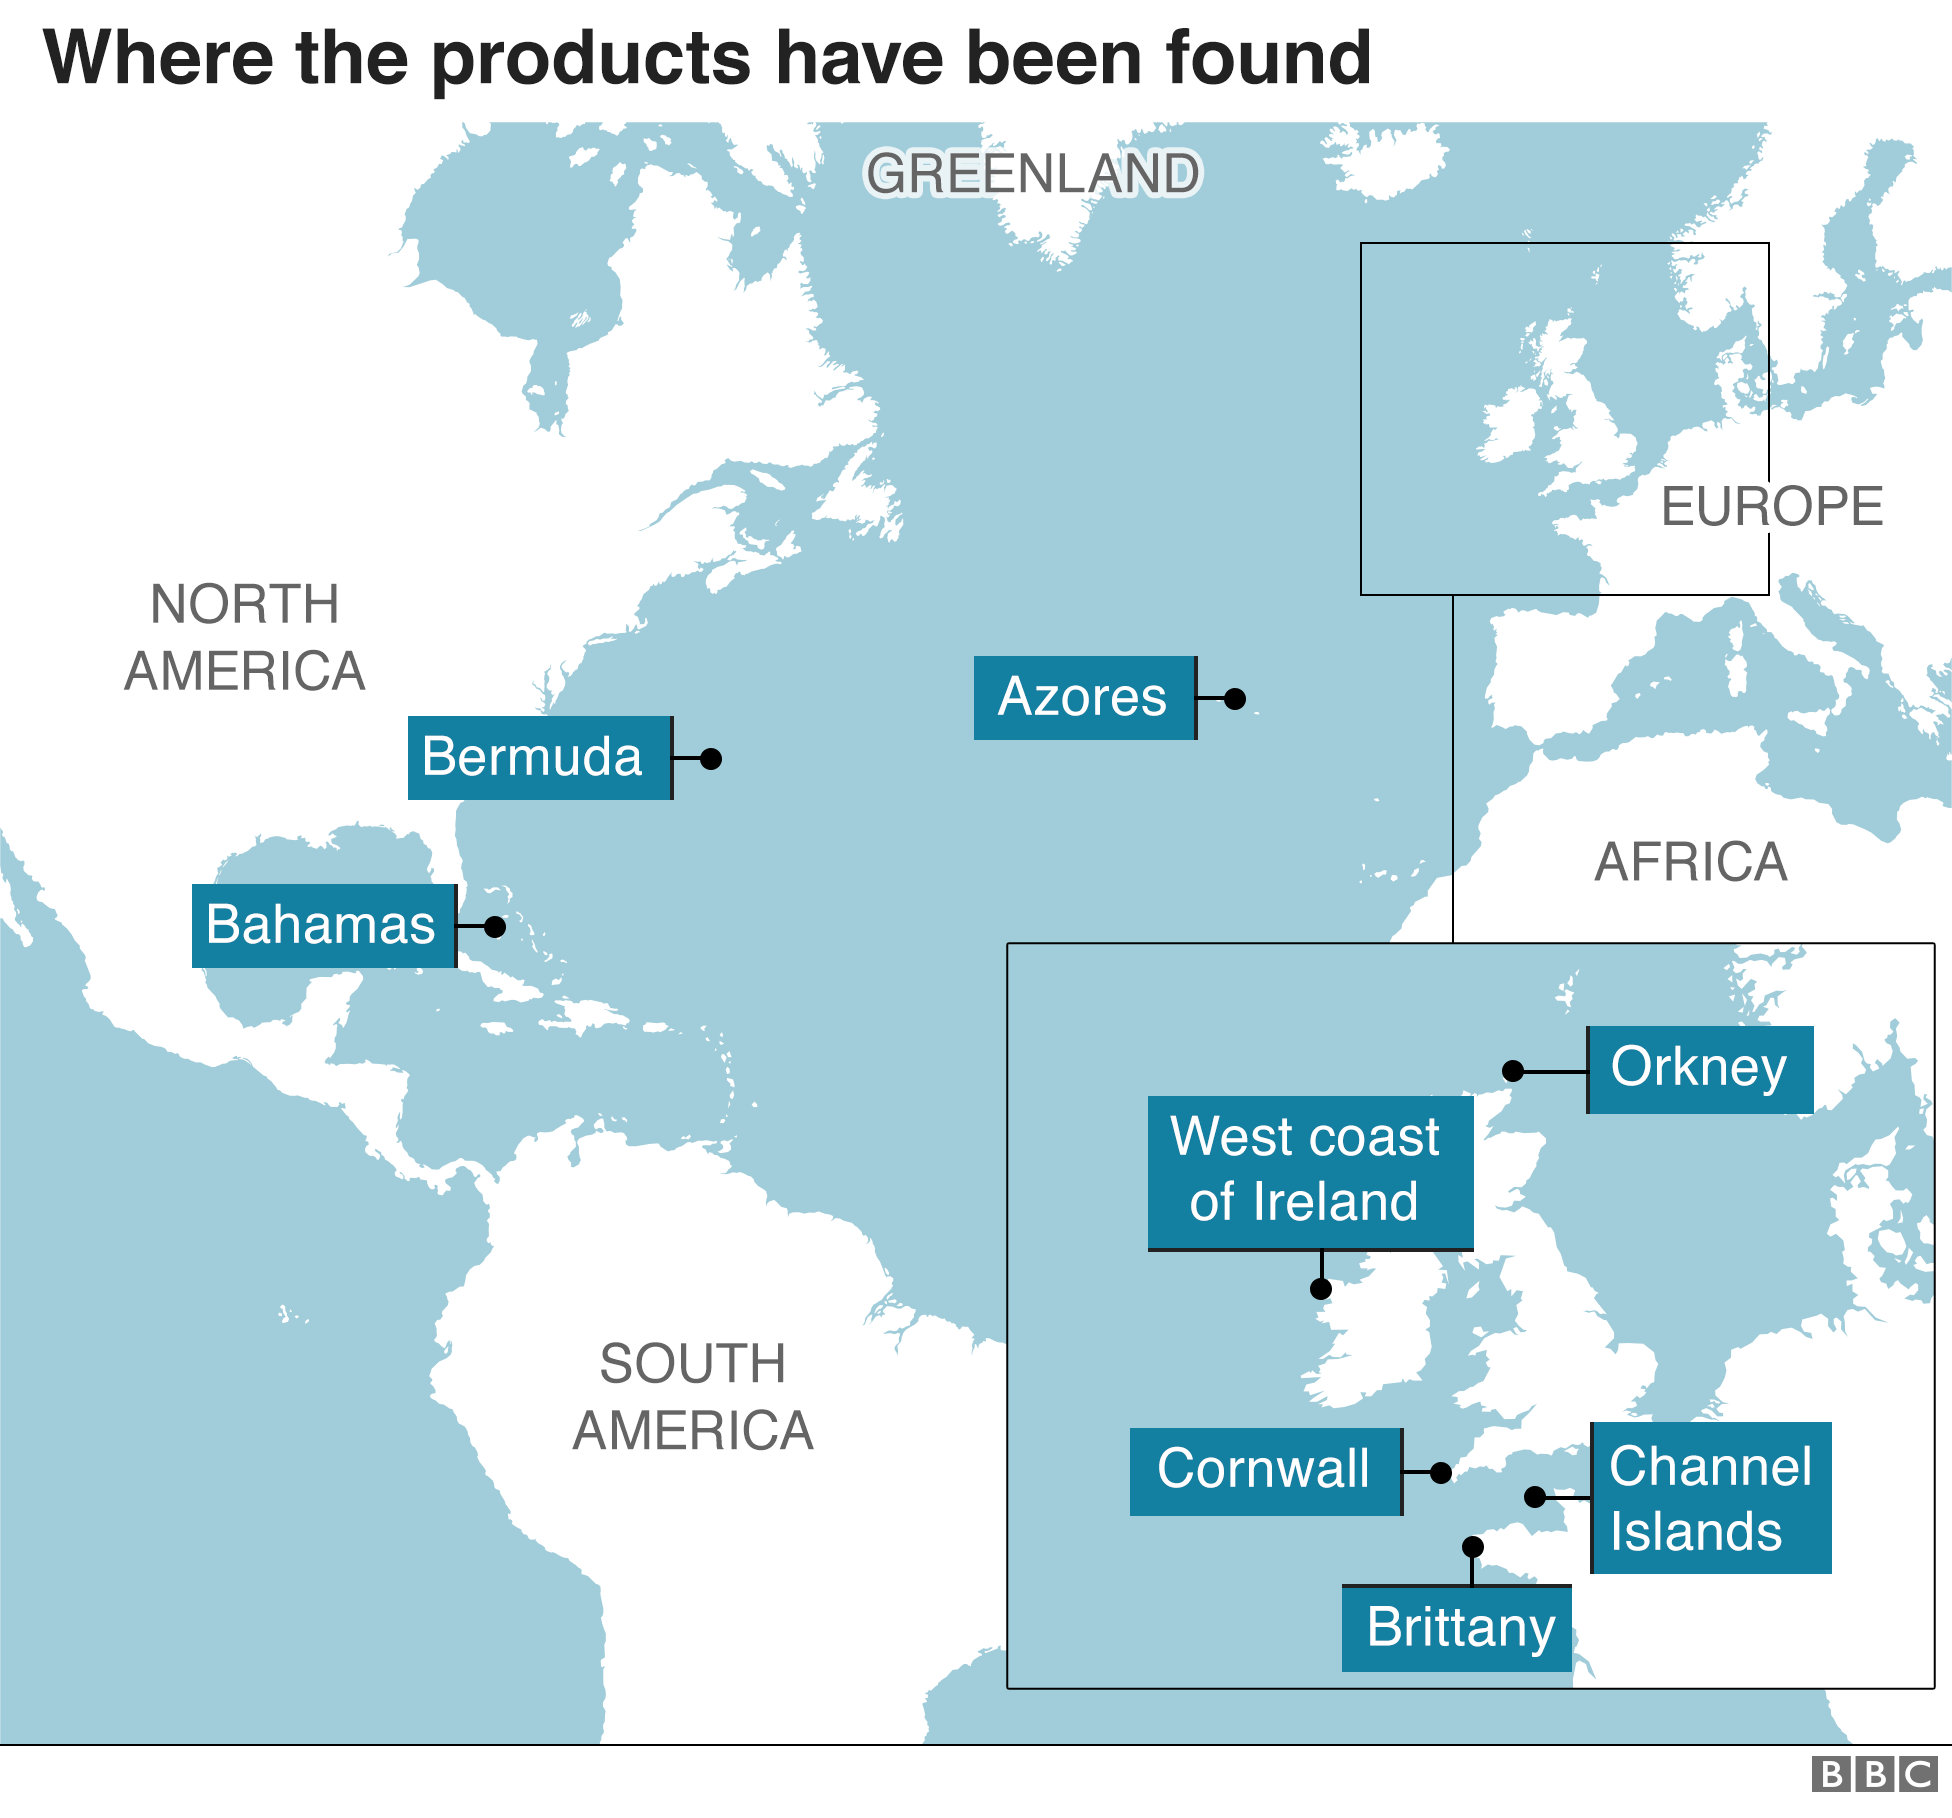 Map showing where the products have been found.